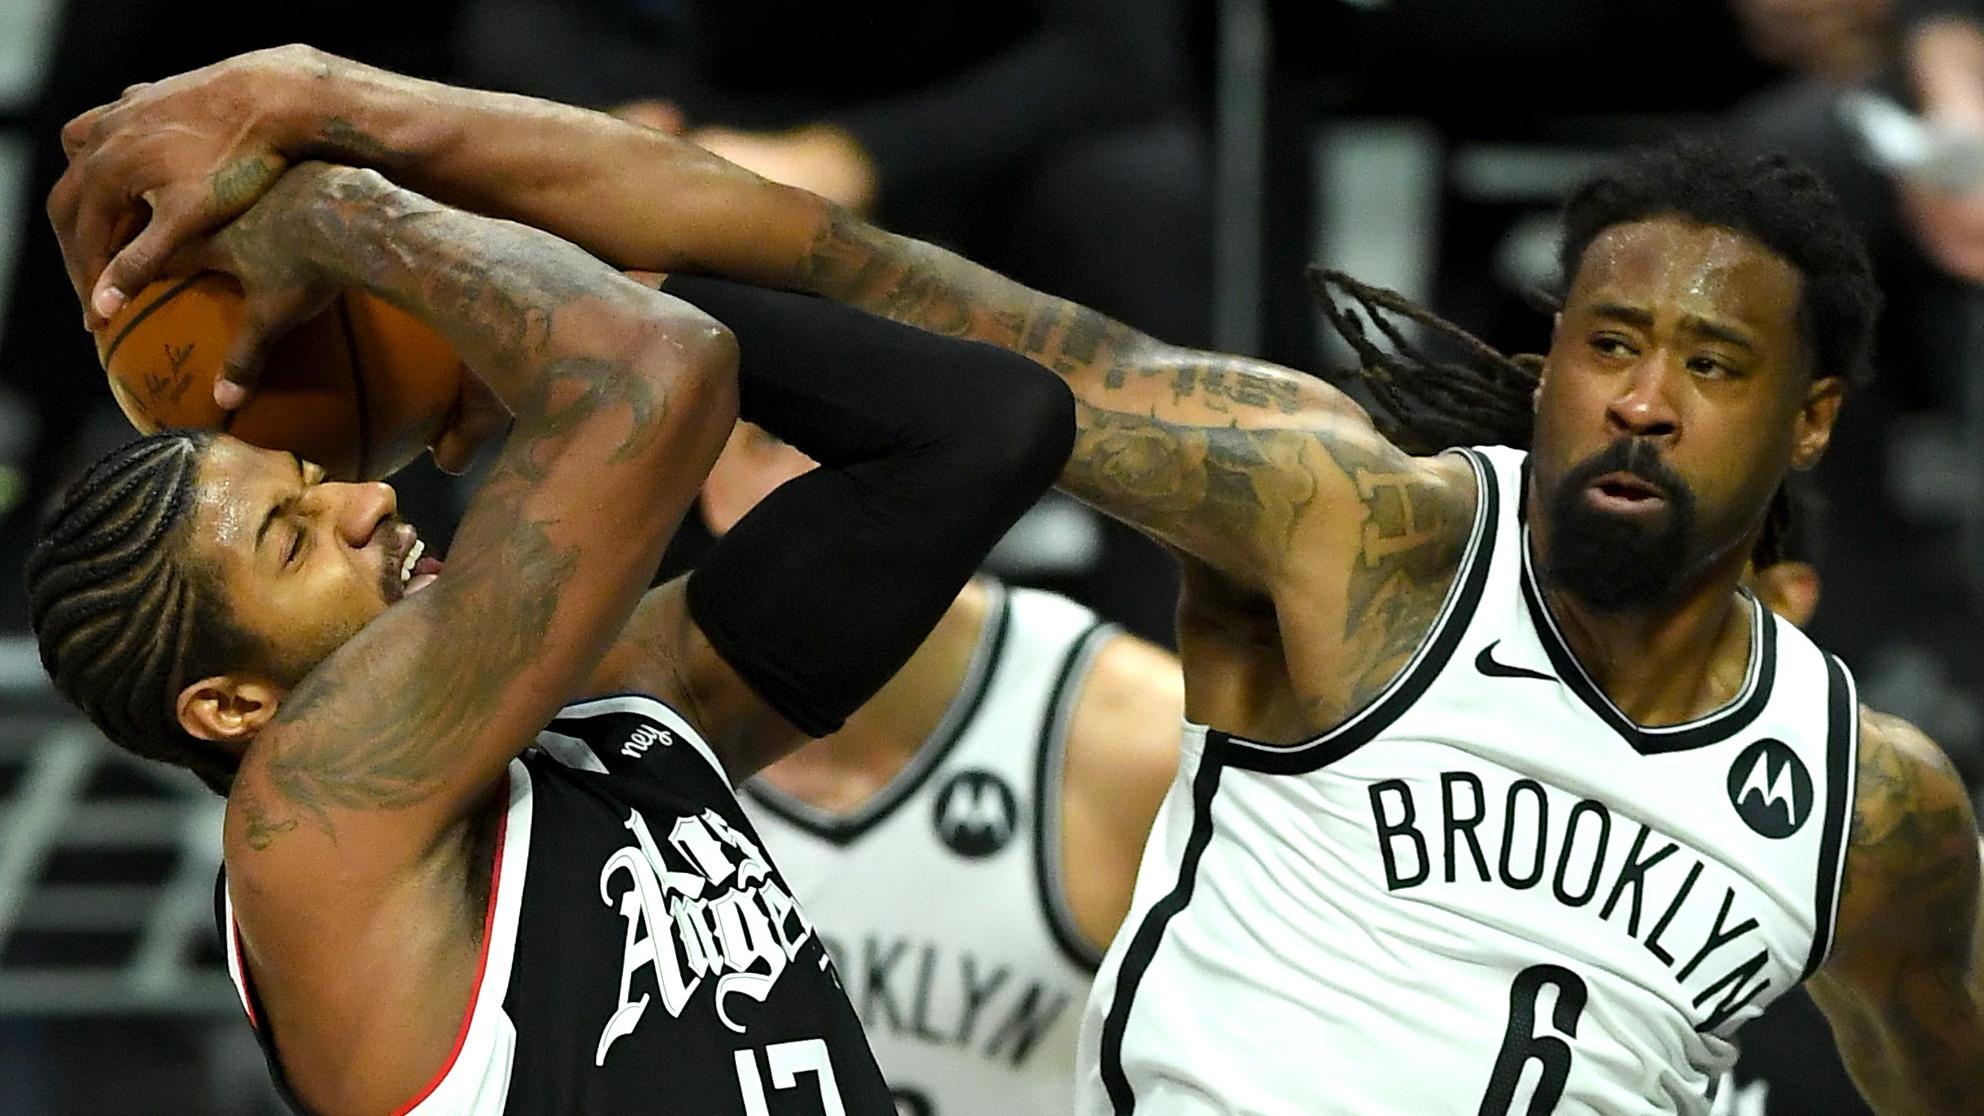 Feb 21, 2021; Los Angeles, California, USA; Los Angeles Clippers guard Paul George (13) is fouled by Brooklyn Nets center DeAndre Jordan (8) as he goes up for a basket in the fourth quarter of the game at Staples Center. / © Jayne Kamin-Oncea-USA TODAY Sports